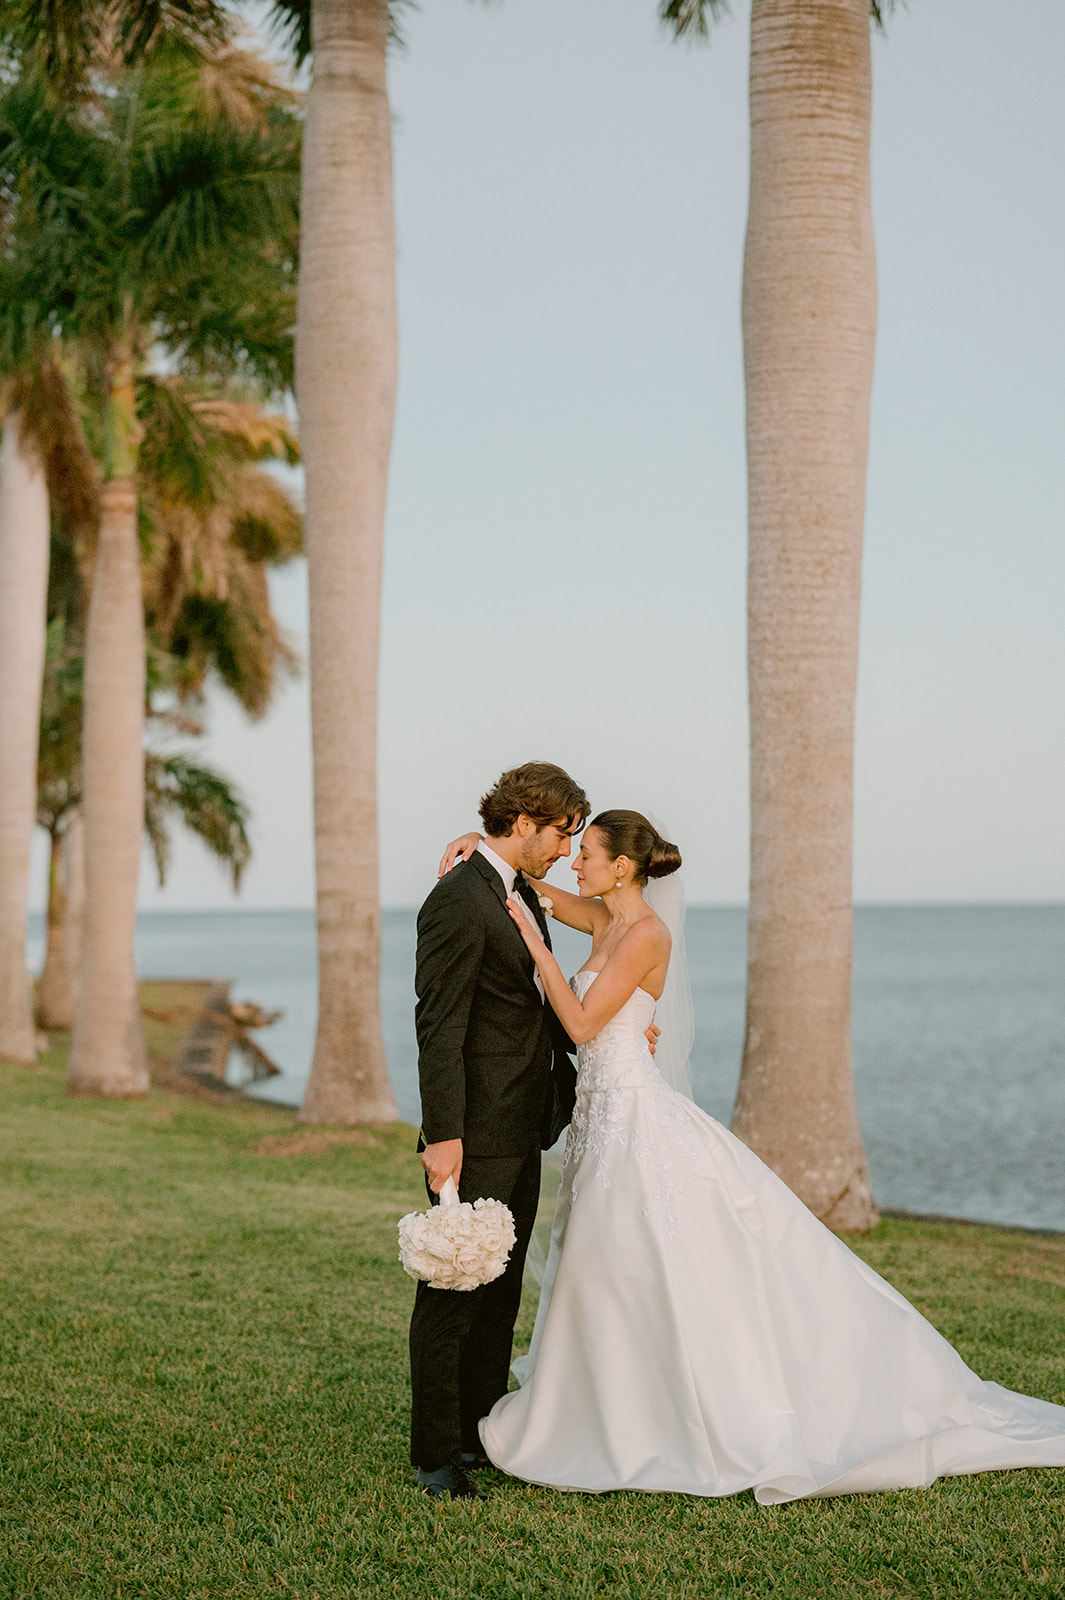 Unforgettable moments at Bales & Shelby's Deering Estate Wedding captured by Miami Florida's finest
